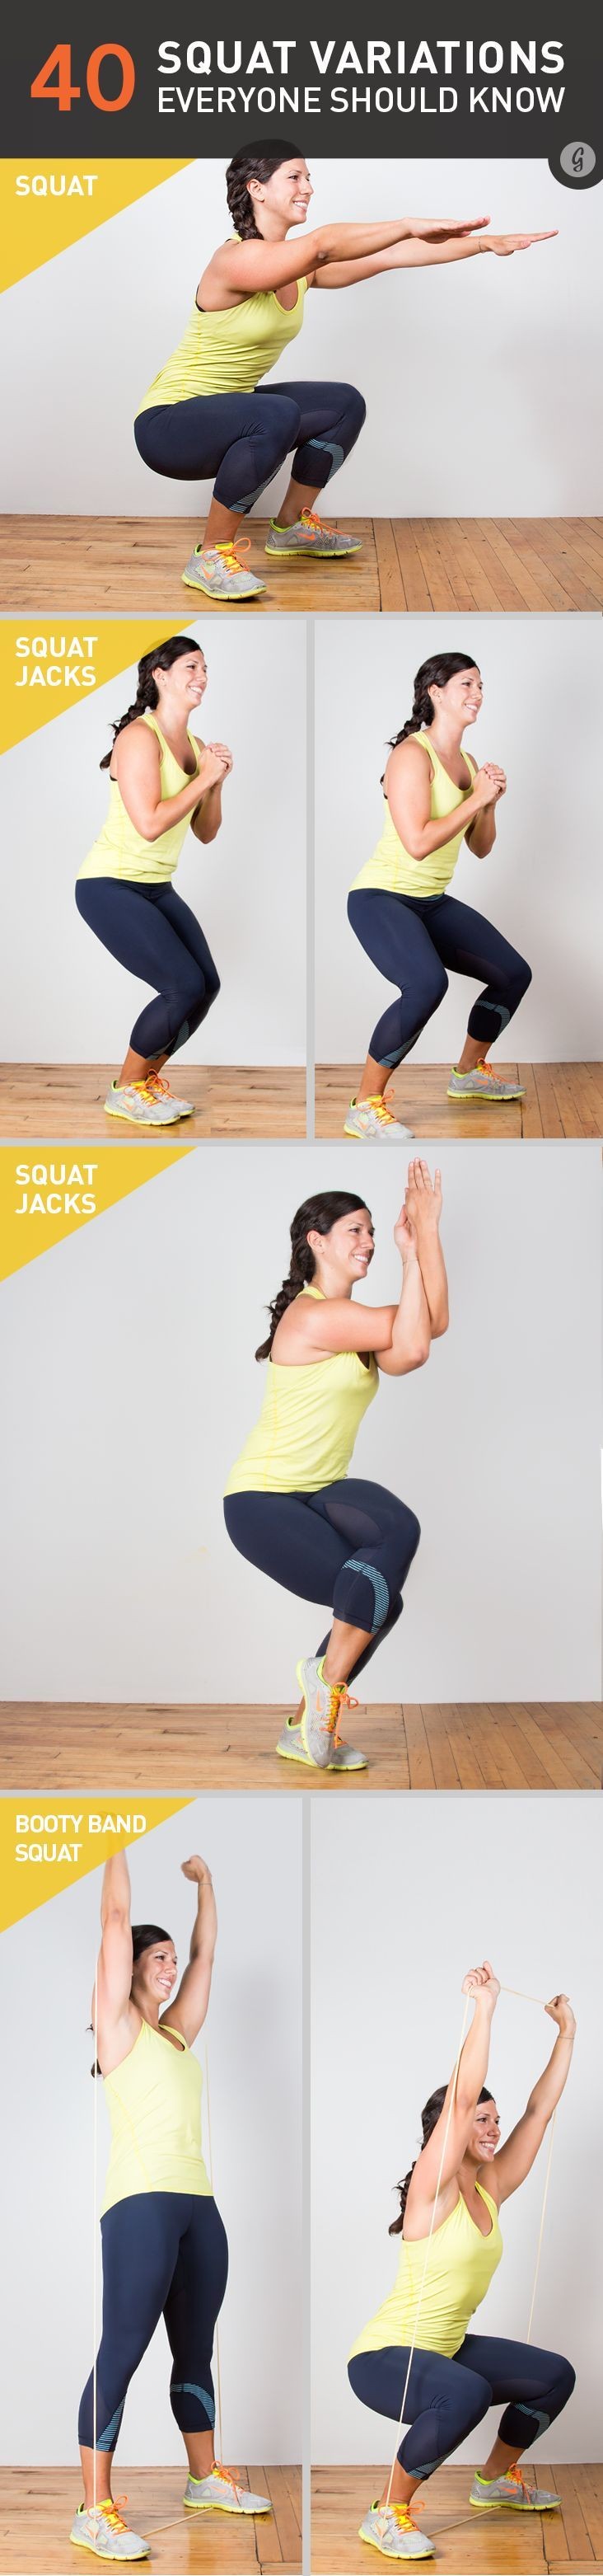 Squats are the ultimate exercise for toning legs a...